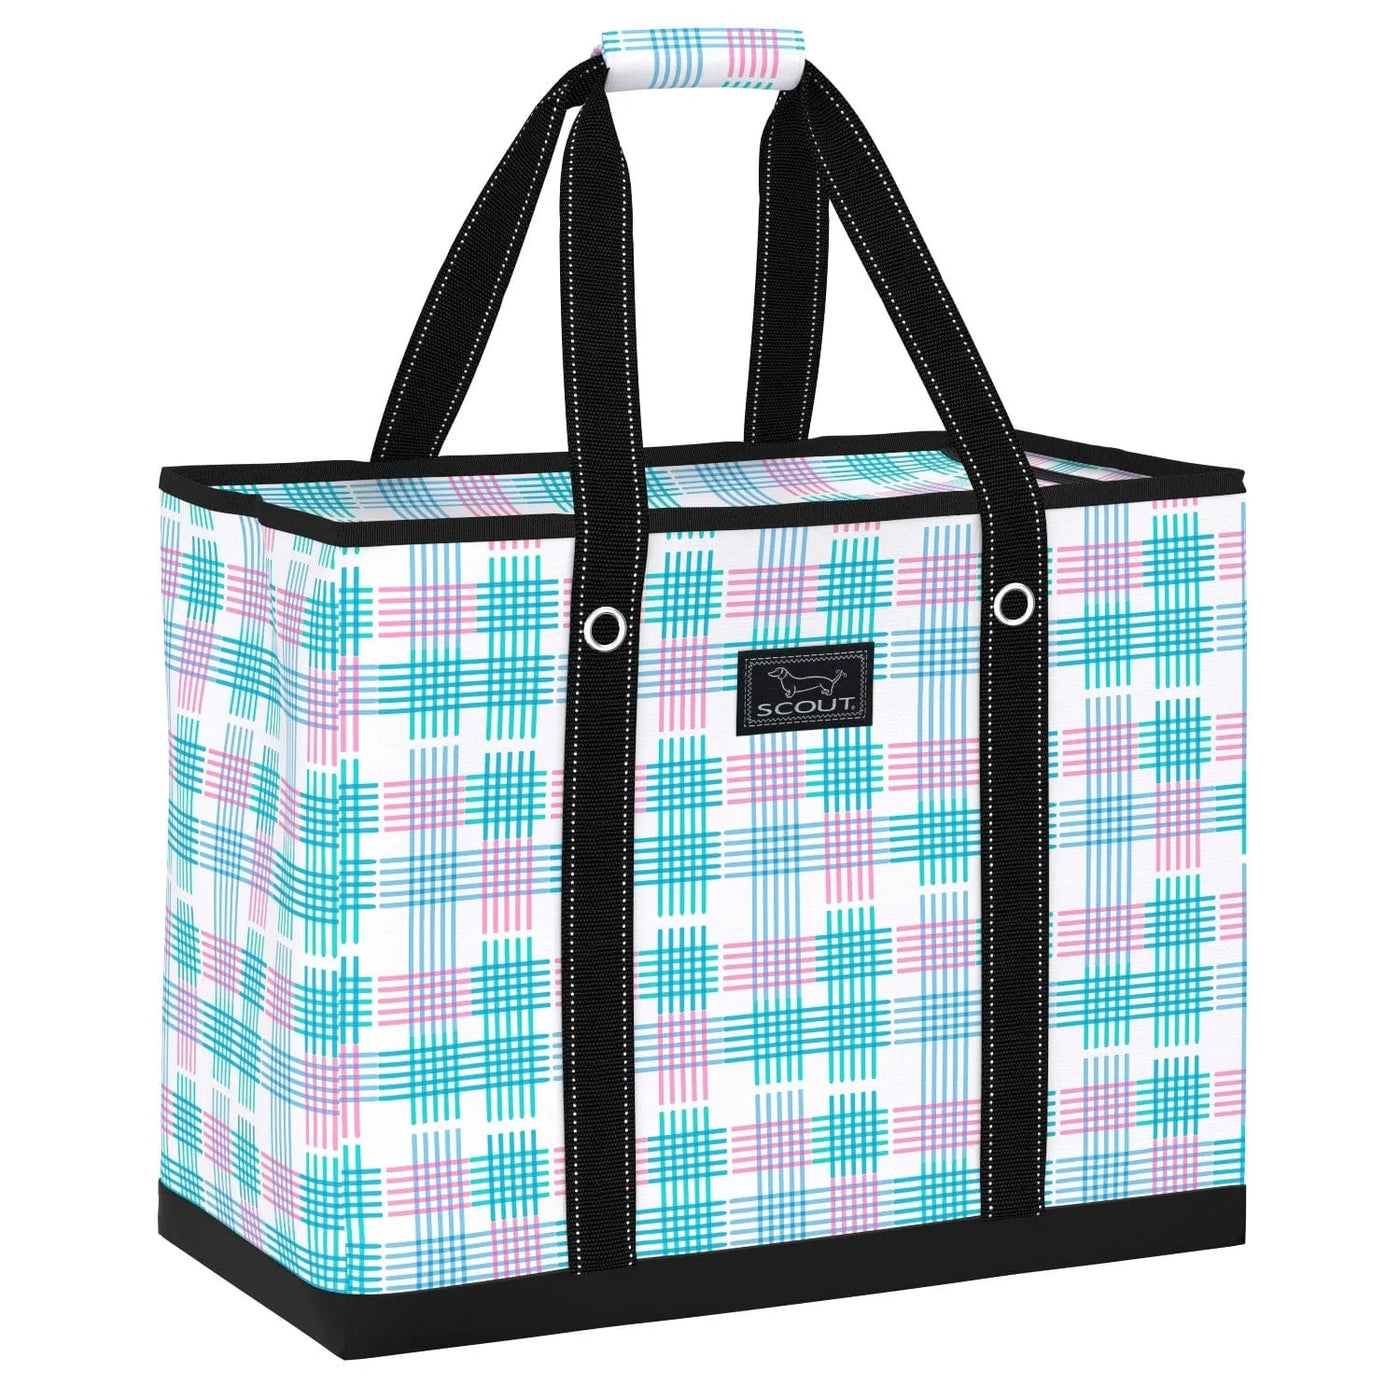 3 Girls Bag Croquet Monsieur by Scout